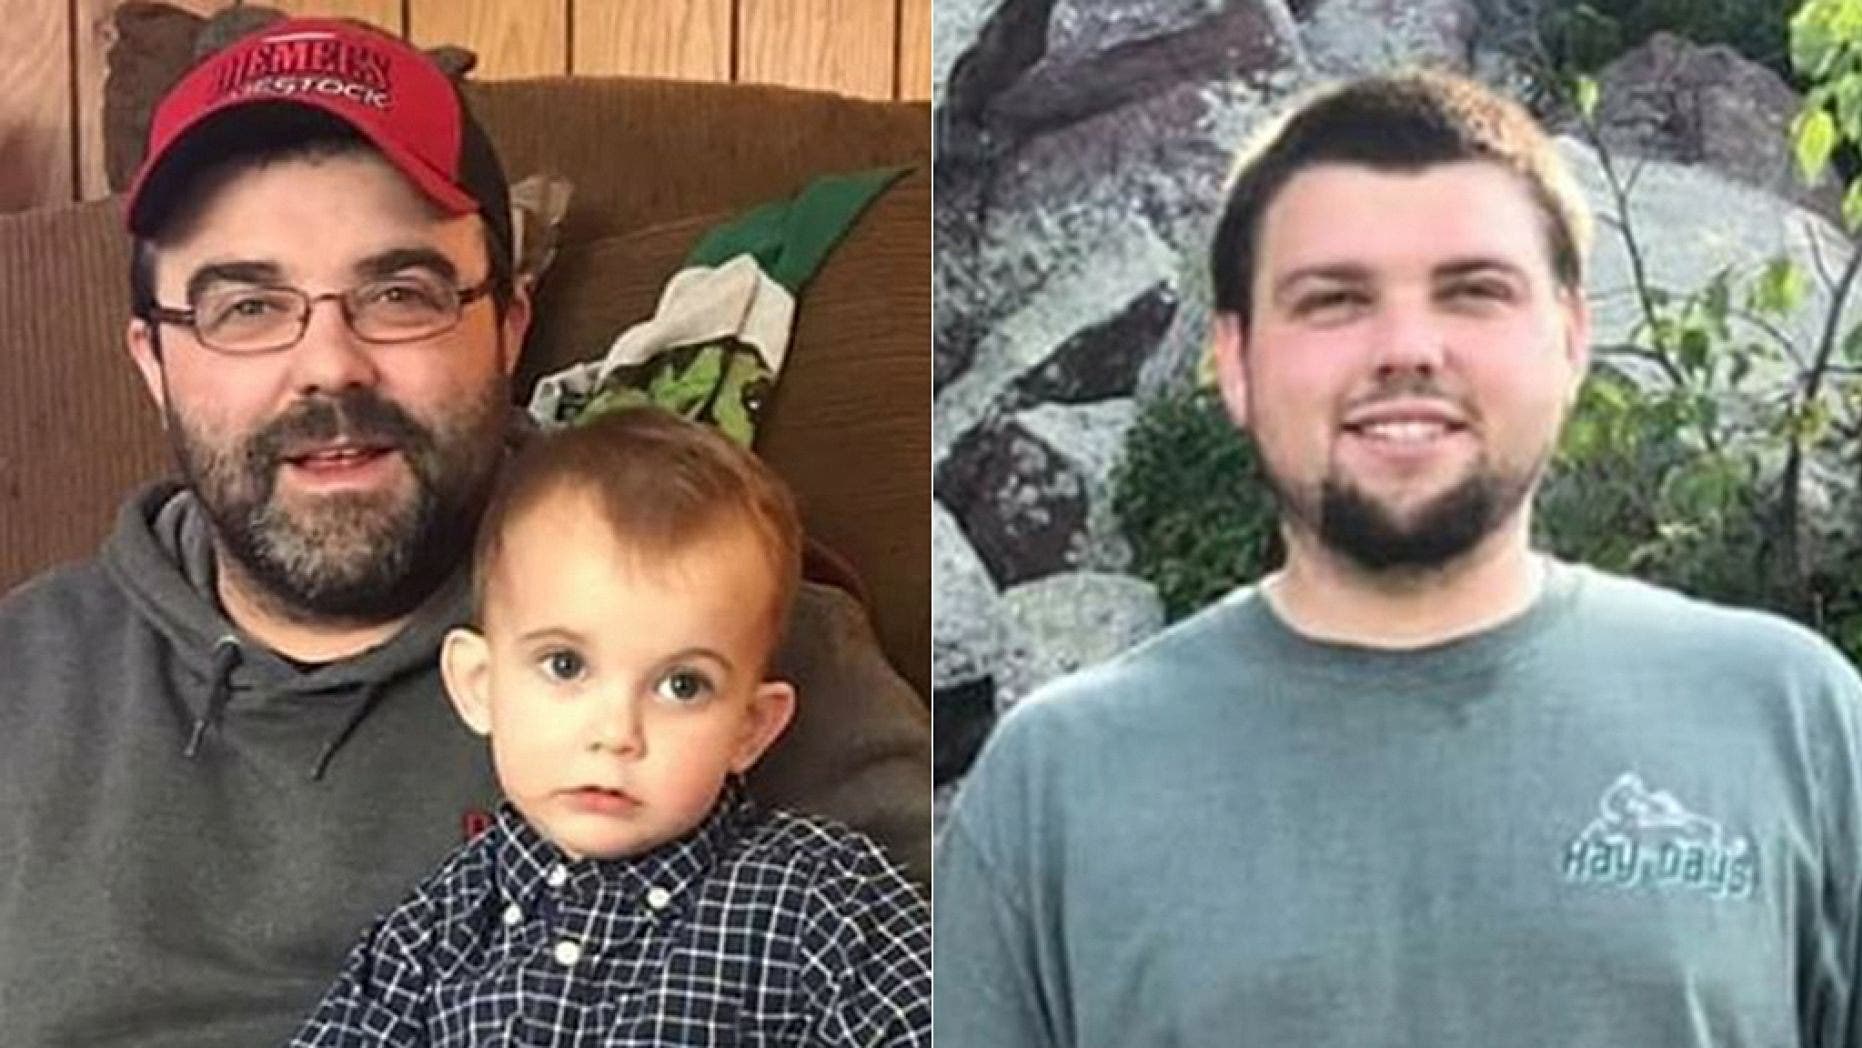 Human remains found on Missouri farm where brothers were last seen, police say